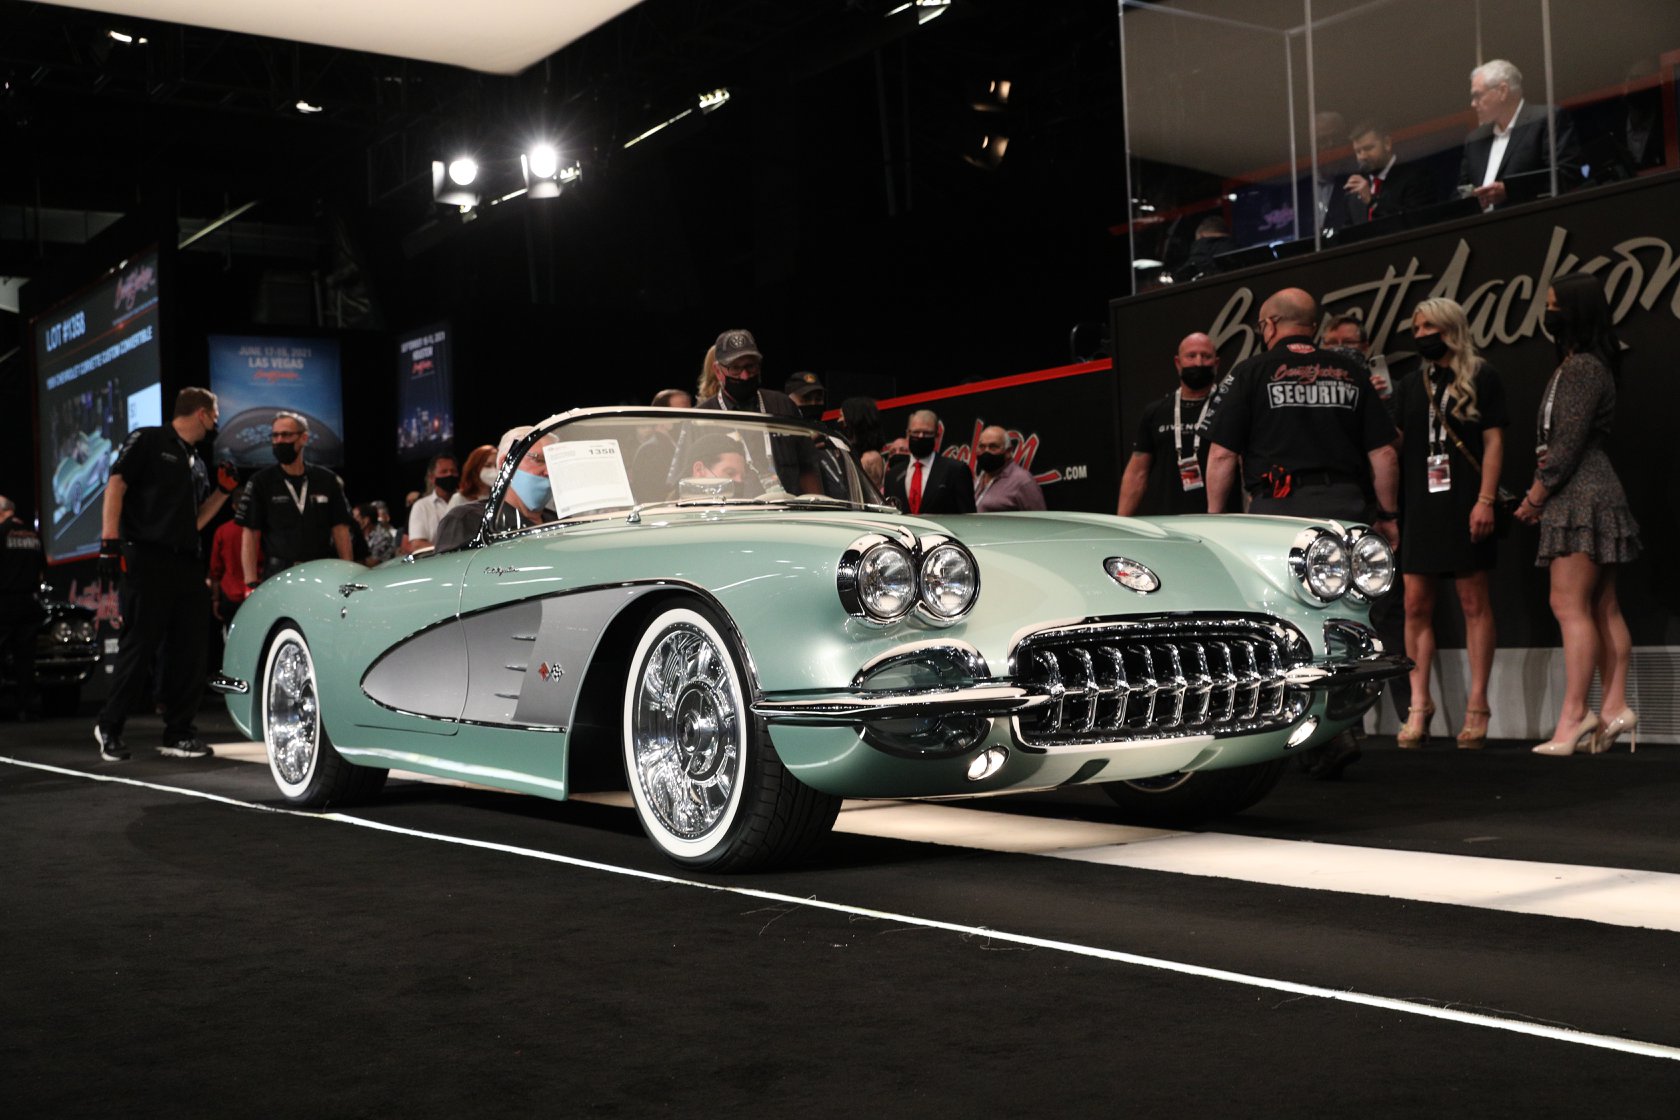 An image of a Chevrolet Corvette that recently sold at auction for $825,000.